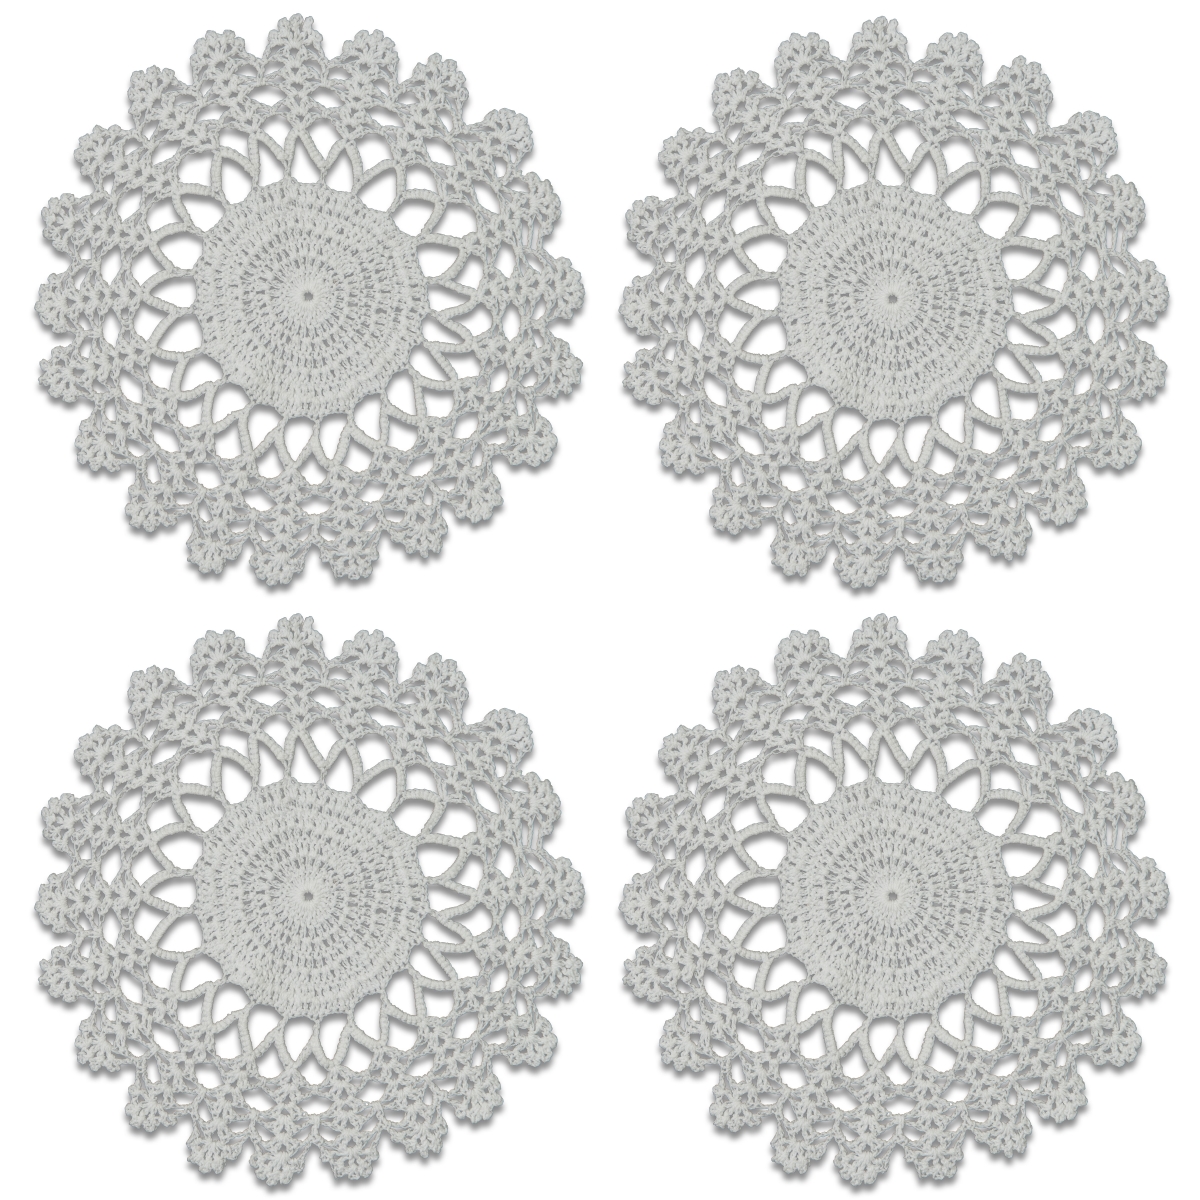 Picture of Heritage Lace CEL-0800W-S 8 in. Crochet Envy Lacy Round Doily - White - Set of 4